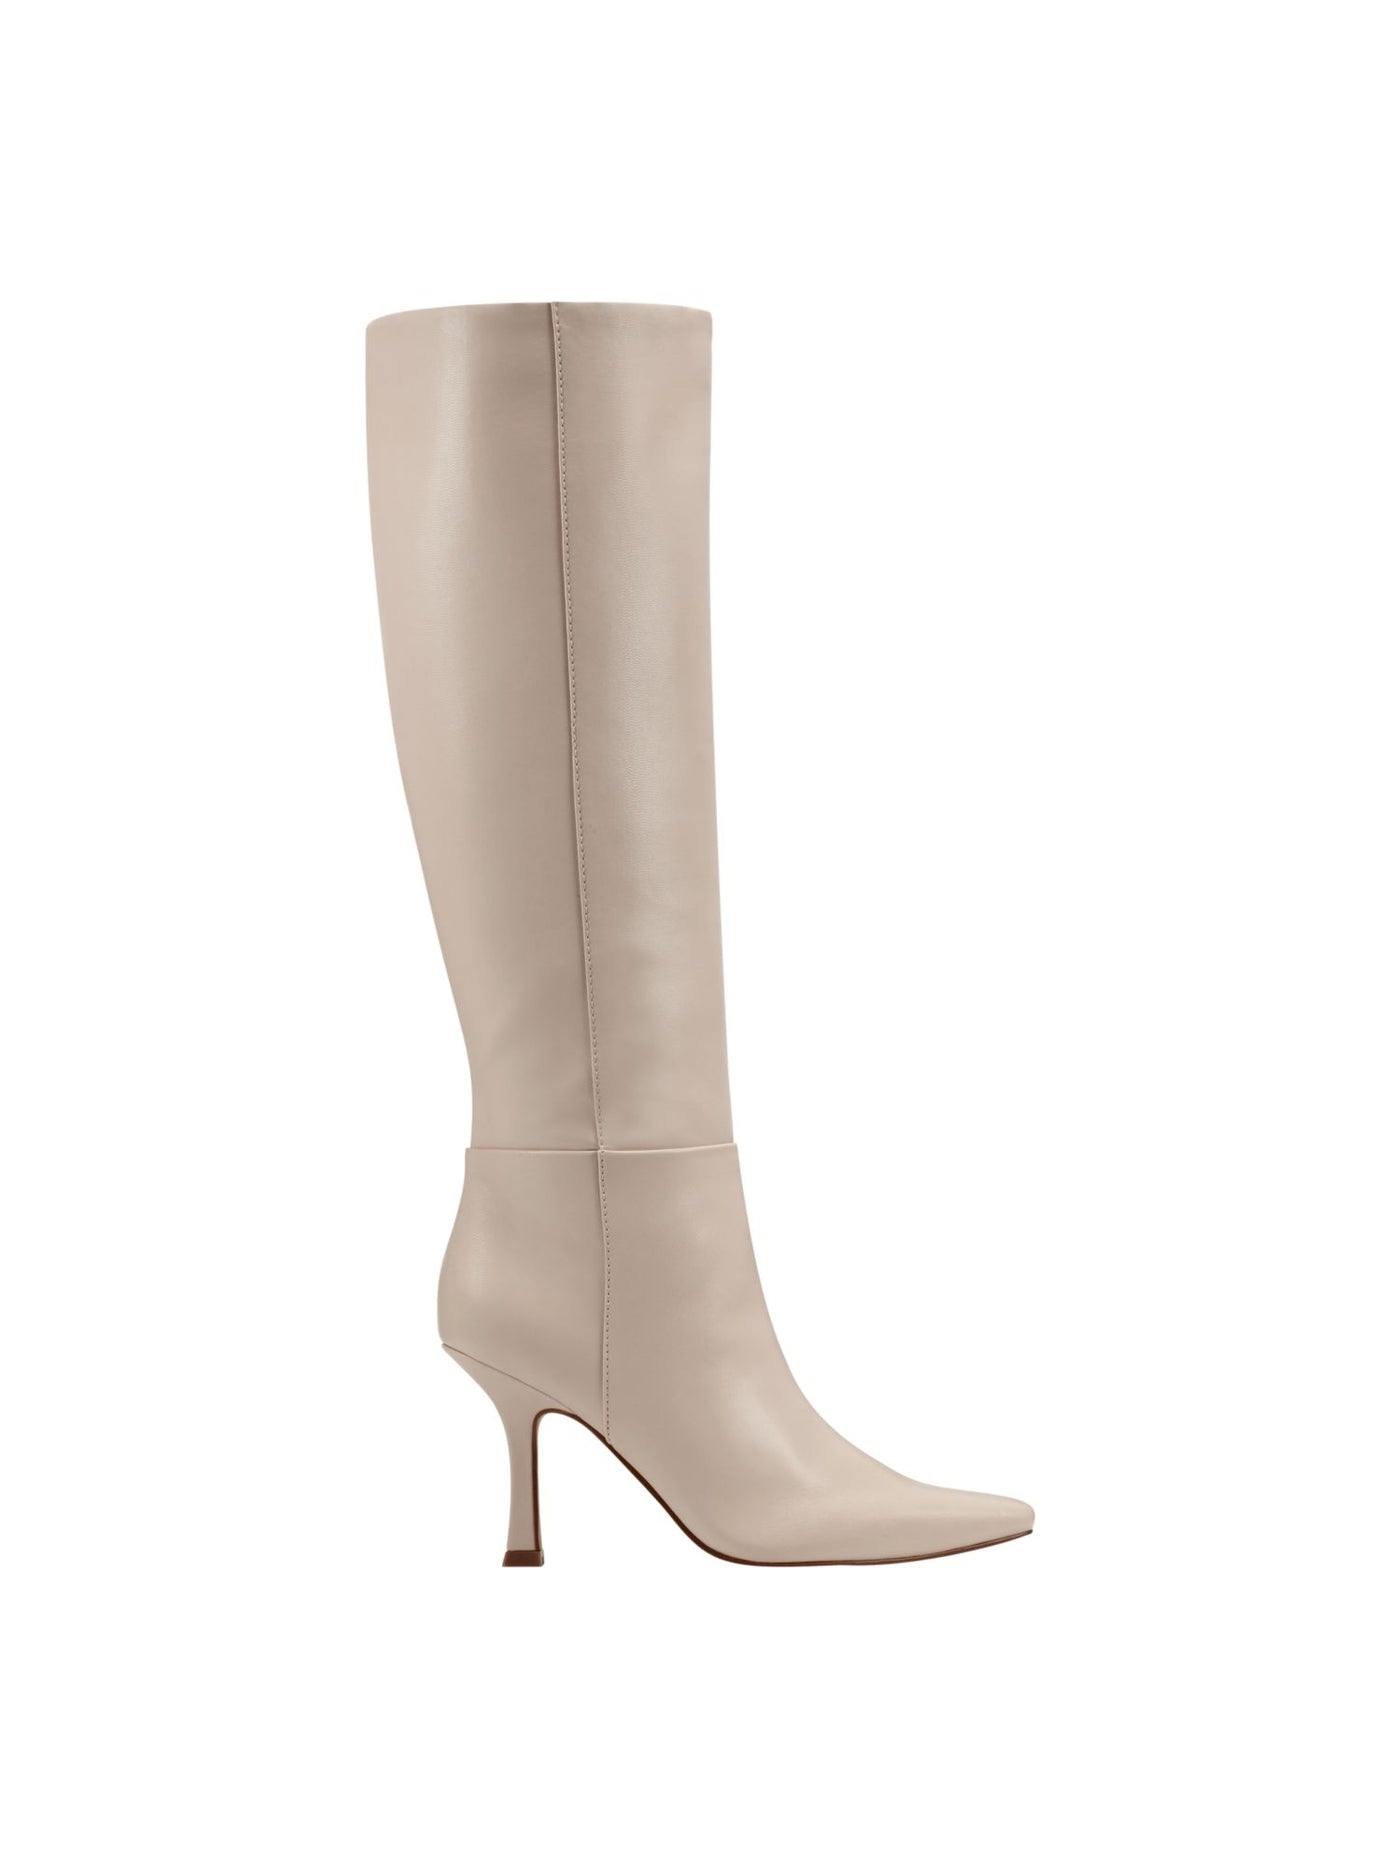 MARC FISHER Womens Ivory Padded Goring Vedant Square Toe Sculpted Heel Zip-Up Dress Boots 7 M